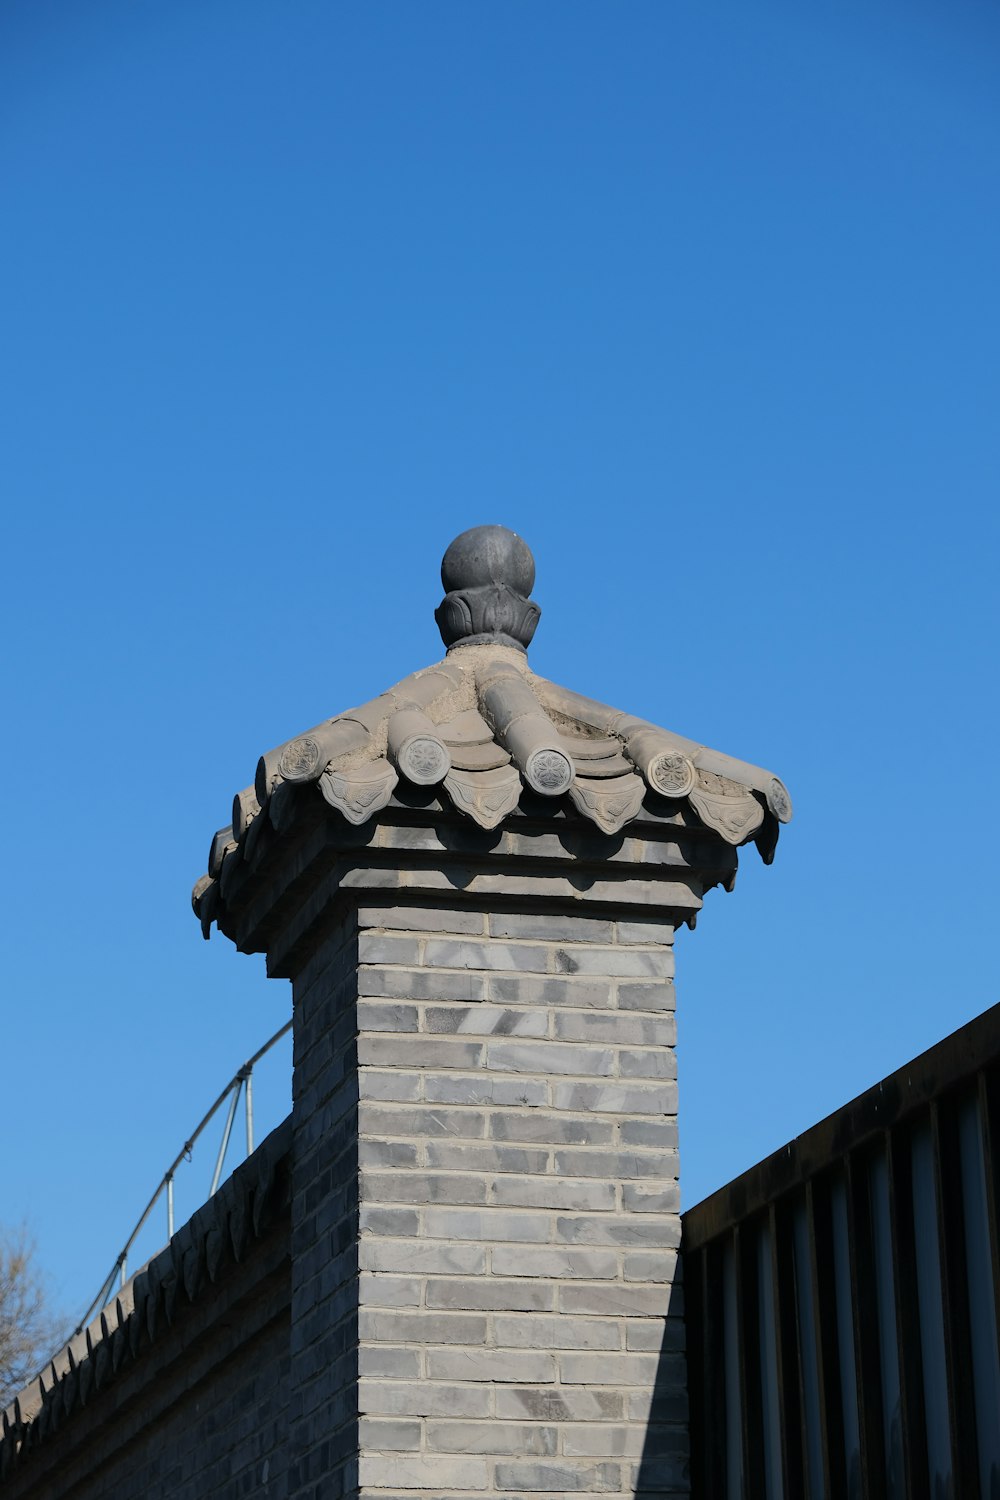 a brick chimney with a weather vane on top of it